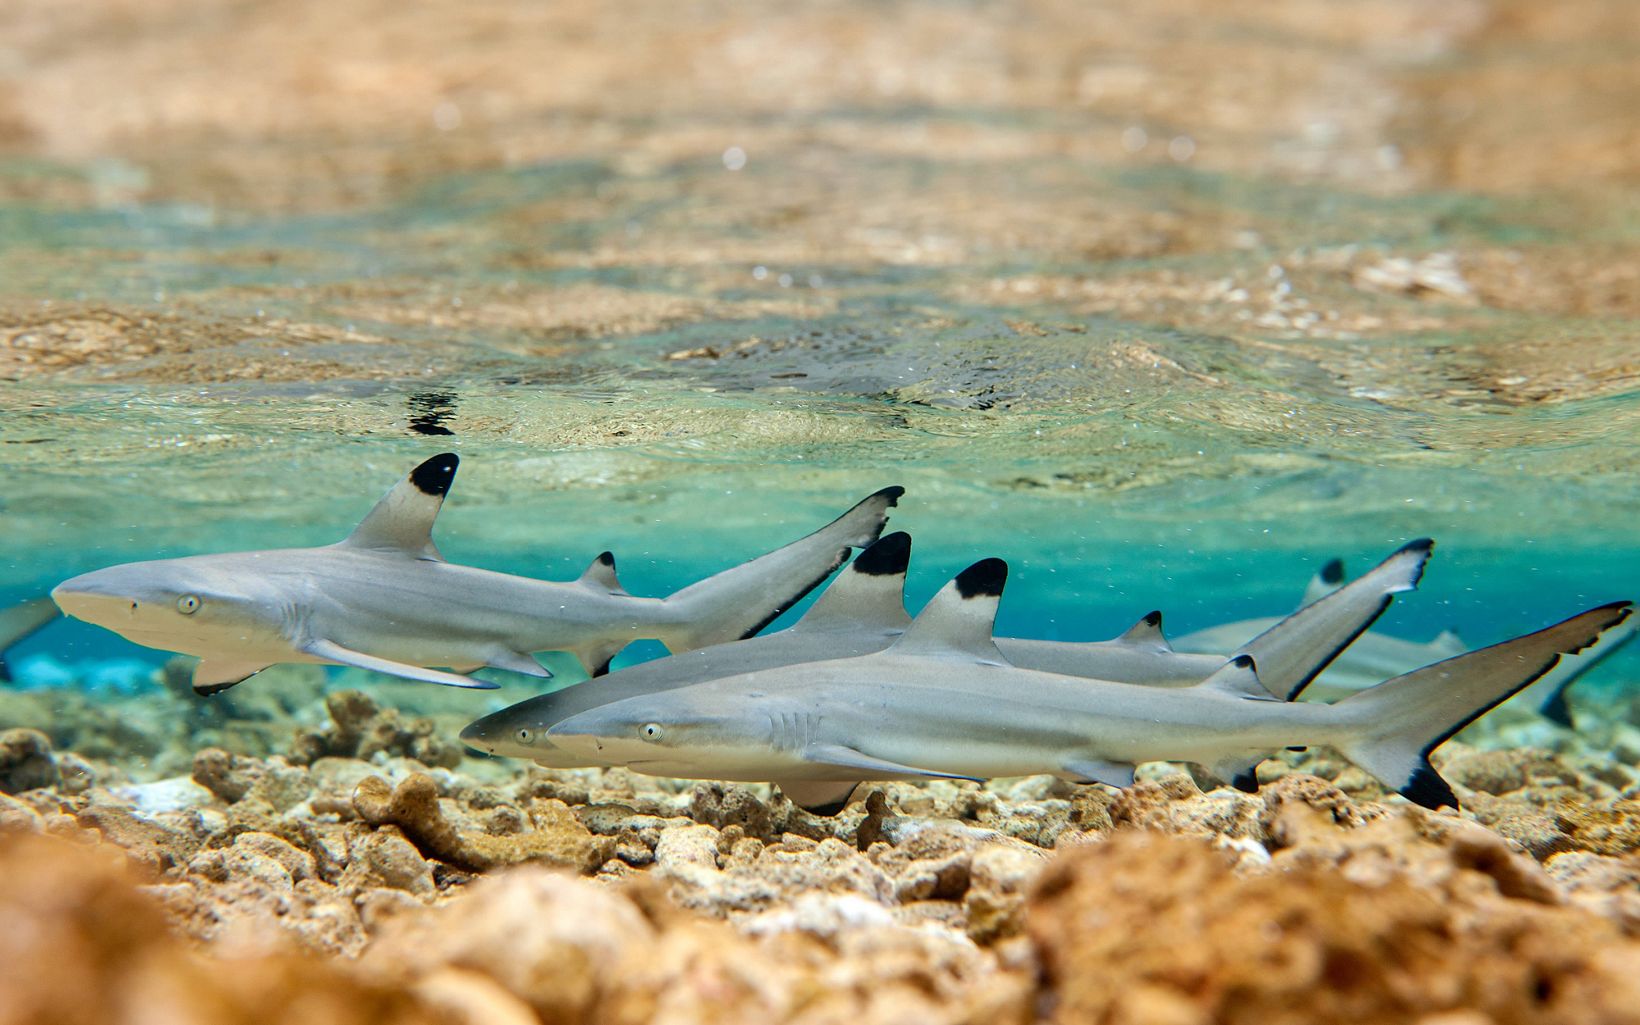 Juvenile blacktip reef sharks wim together in a shallow nursery-like area on the north end of Barren Island within Palmyra Atoll in the equatorial Northern Pacific. © Tim Calver/TNC